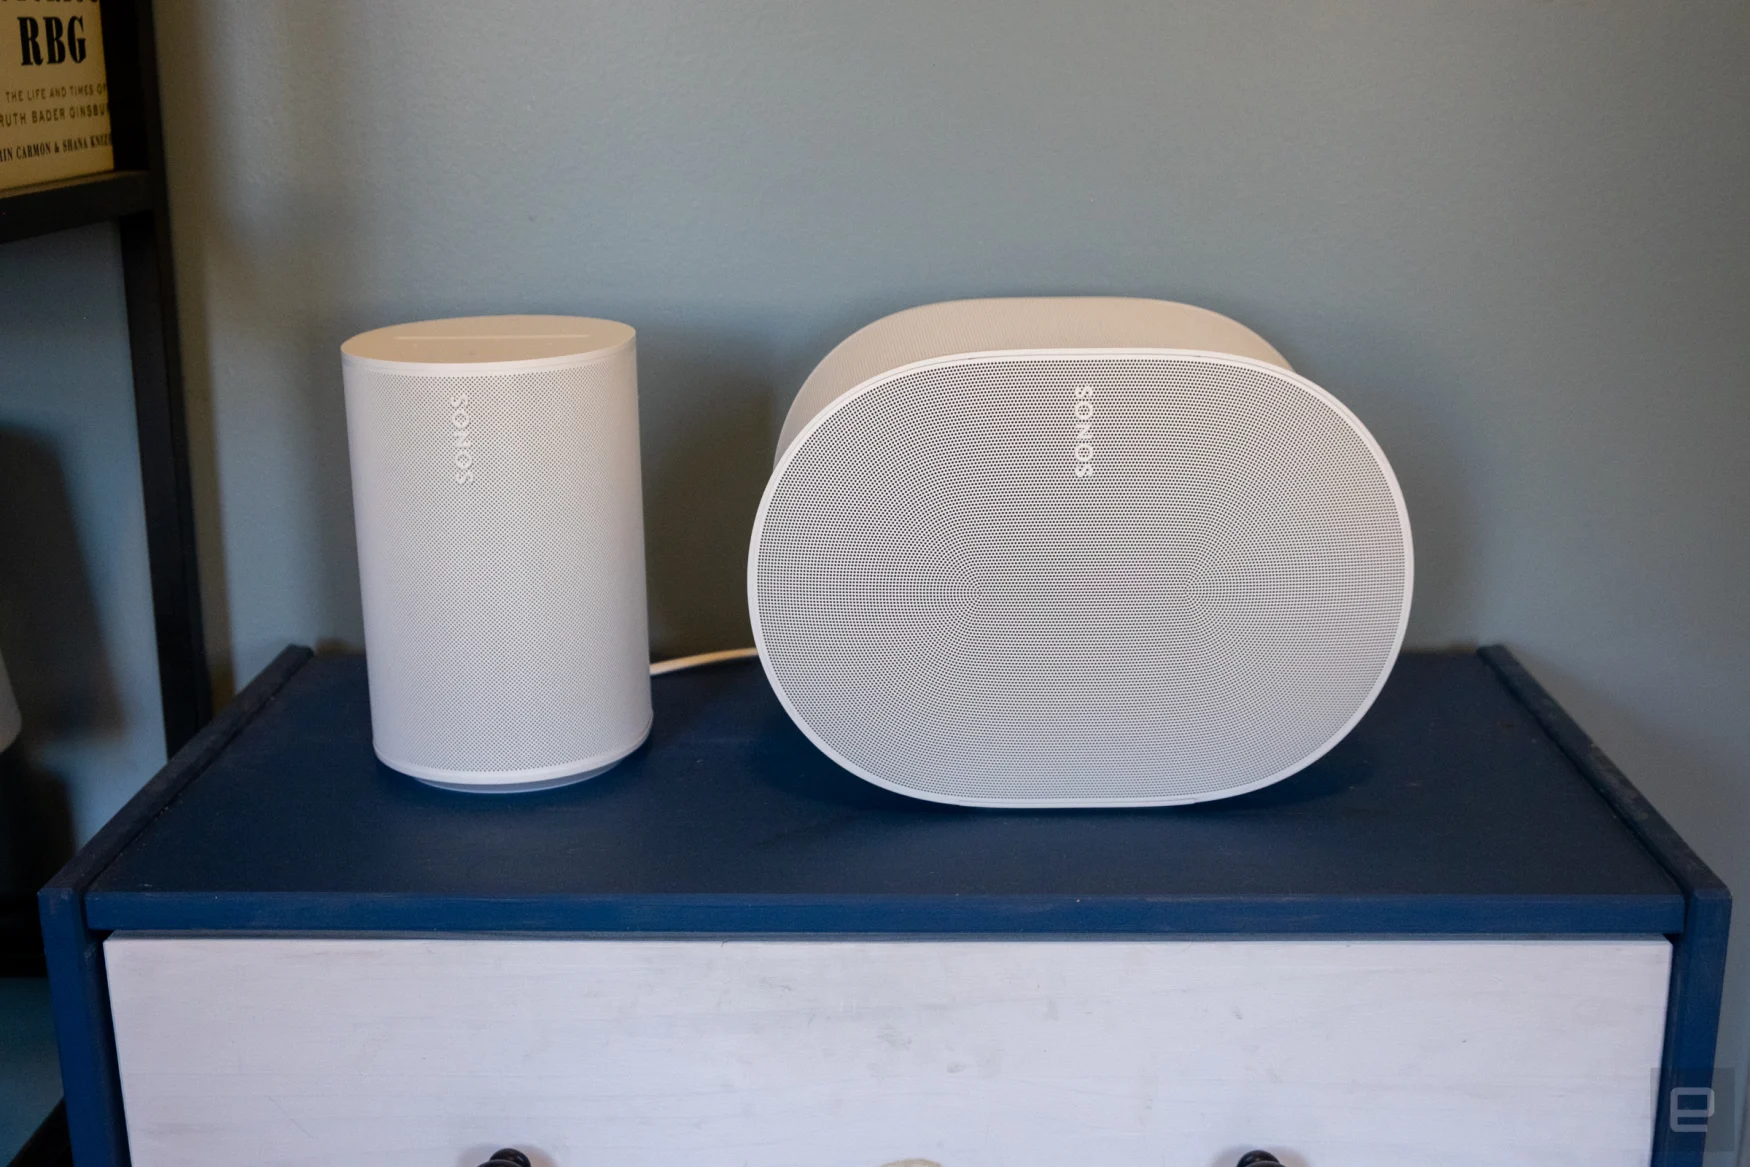 Comparison of the two newest Sonos speakers, the Era 100 and Era 300.